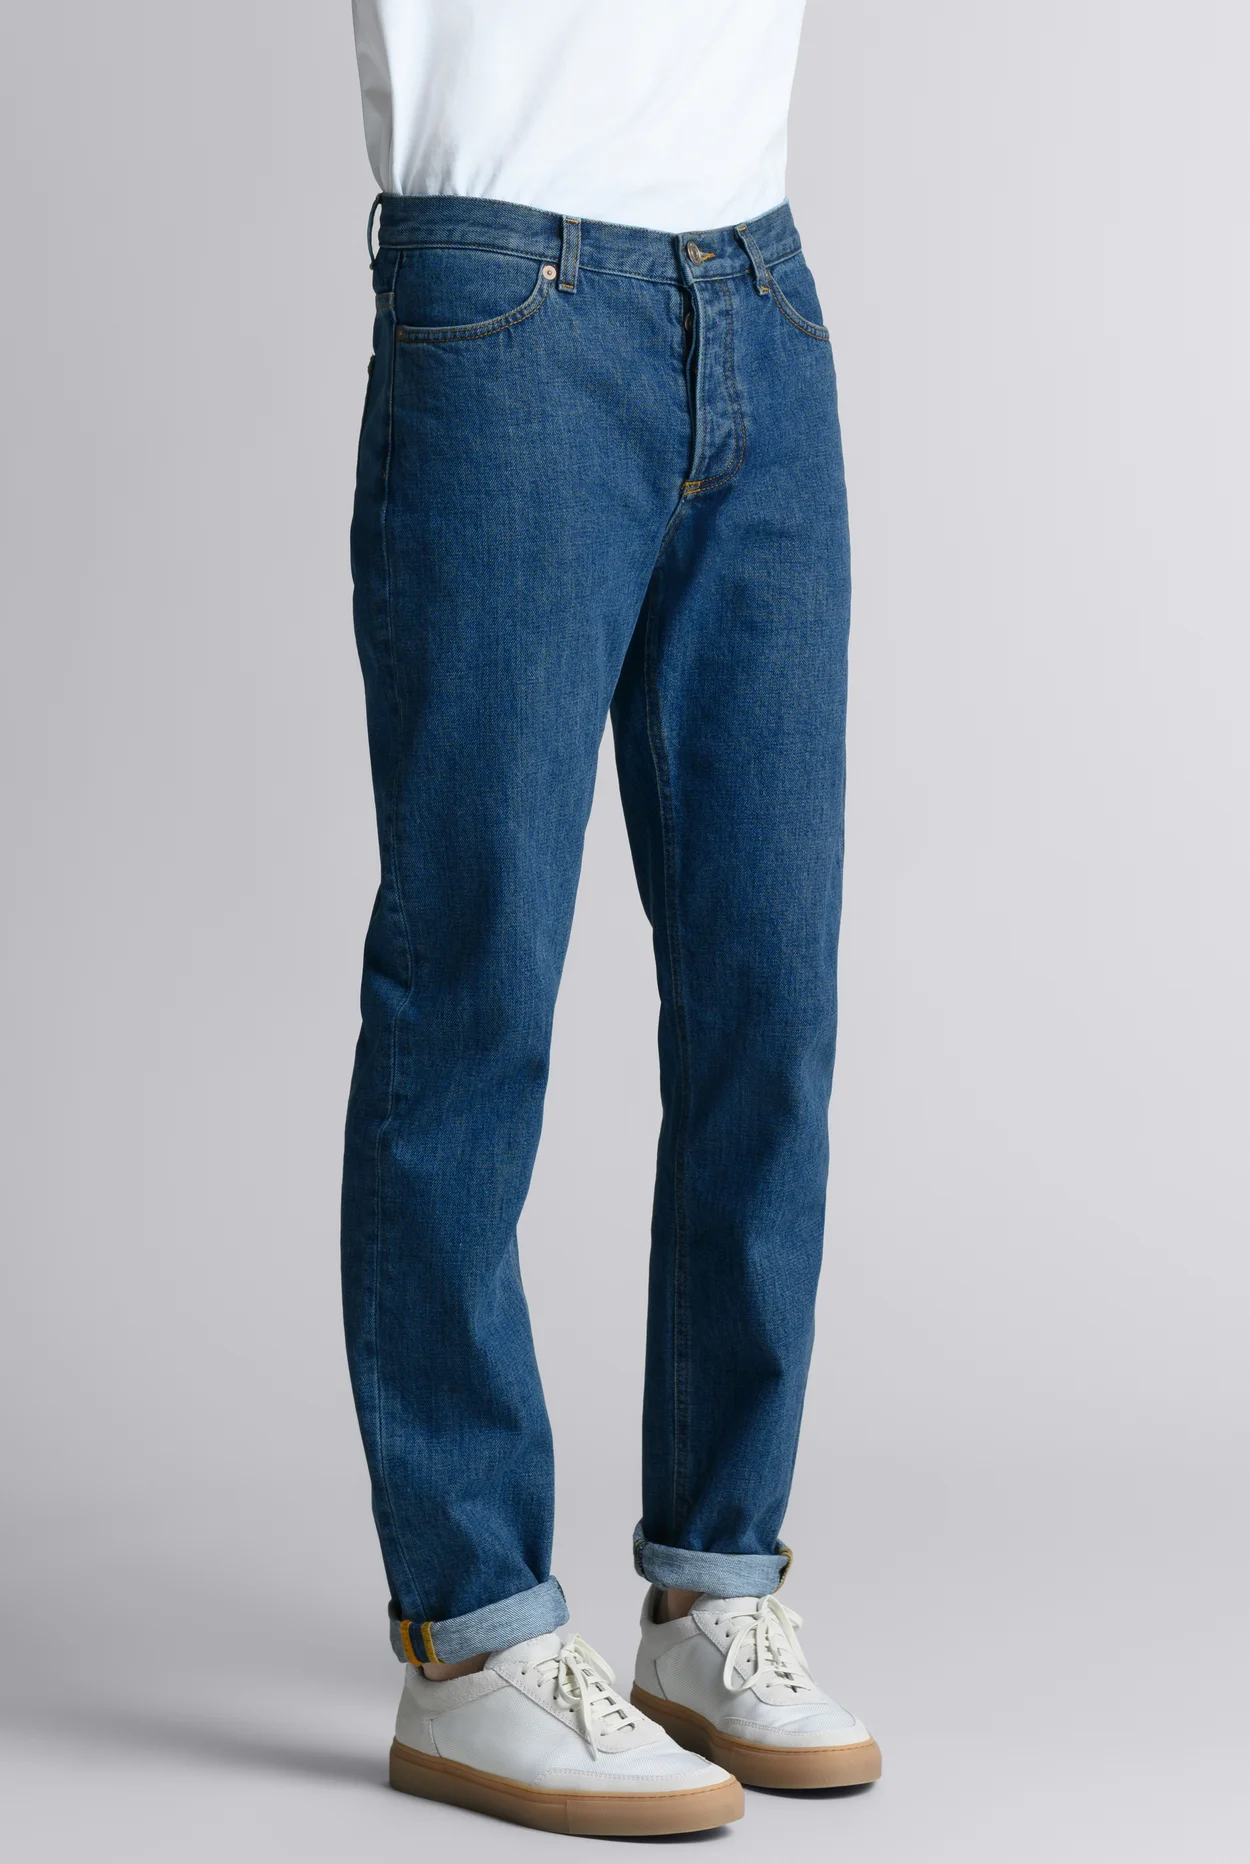 ROY ROGER'S Stone washed jeans for man autumn winter 14-15 - Rione Fontana-saigonsouth.com.vn